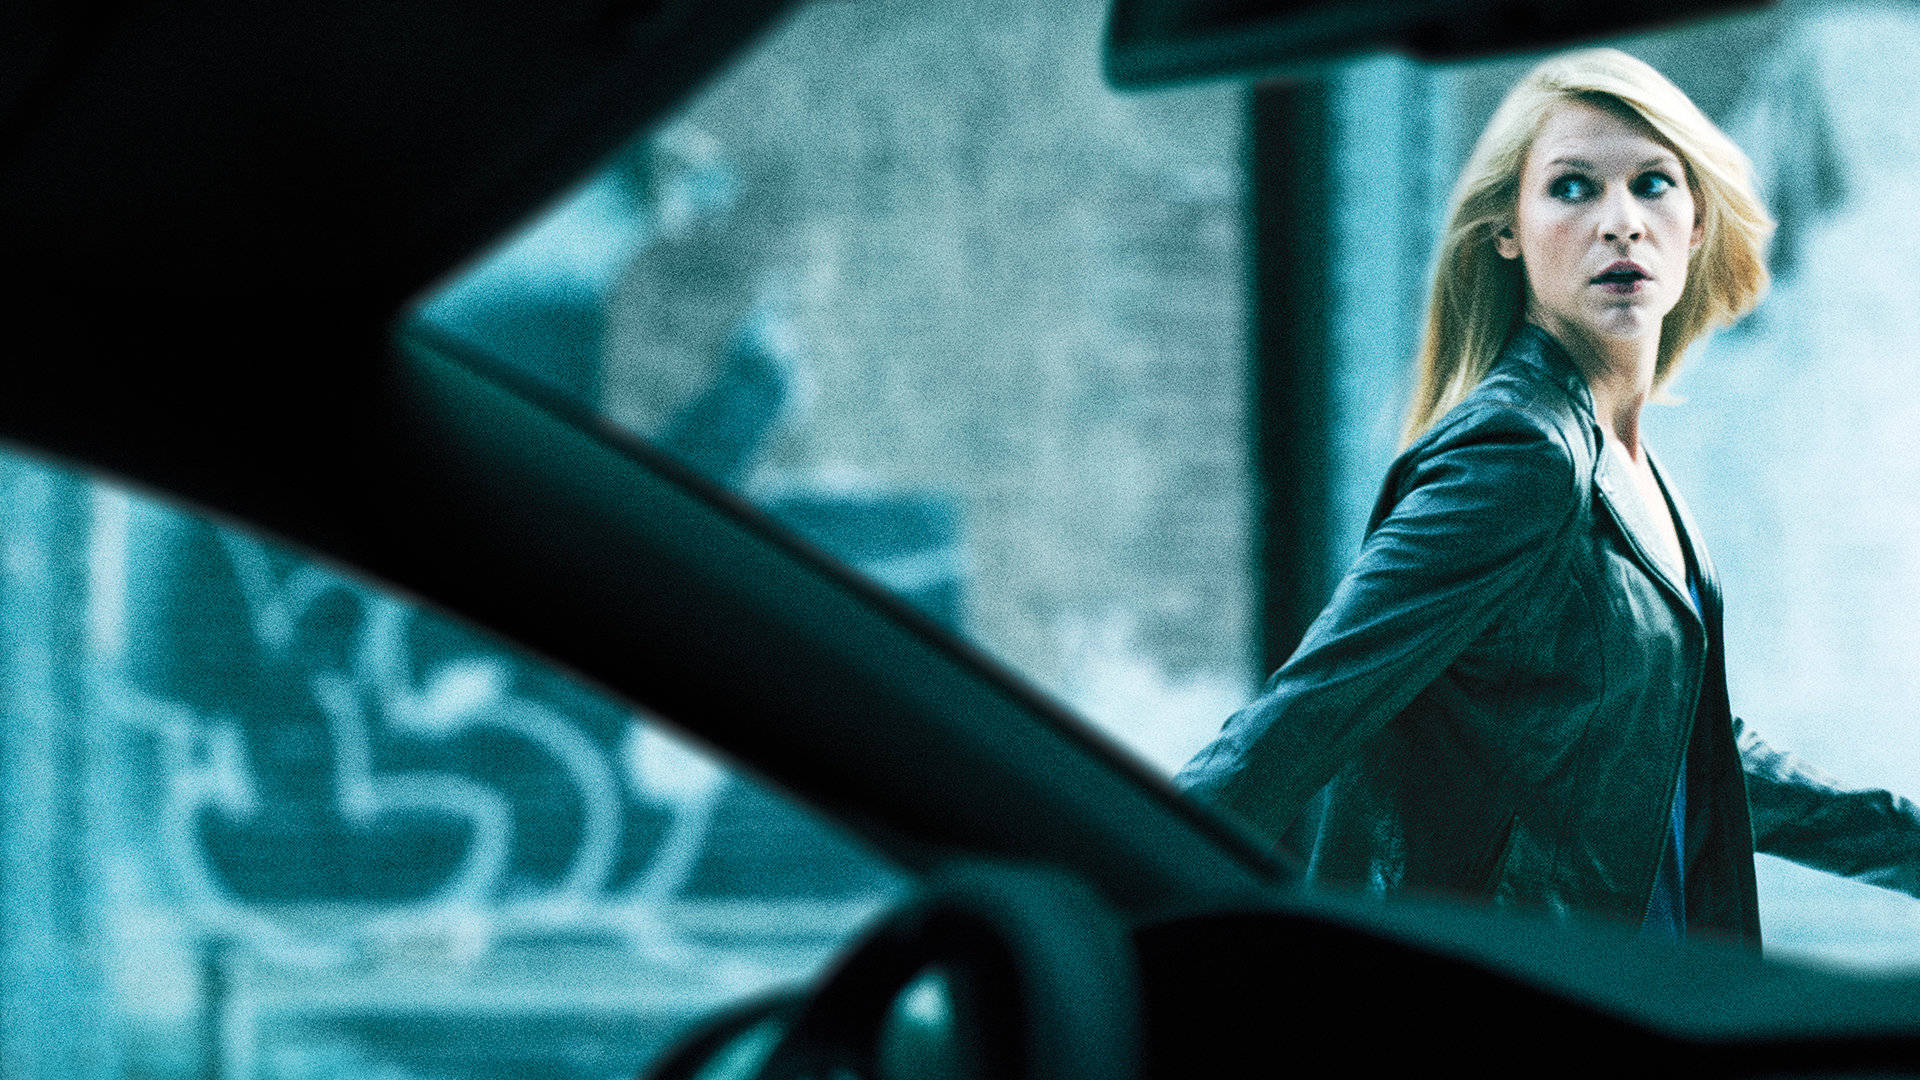 Homeland - CIA Agent Carrie Mathison in action Wallpaper